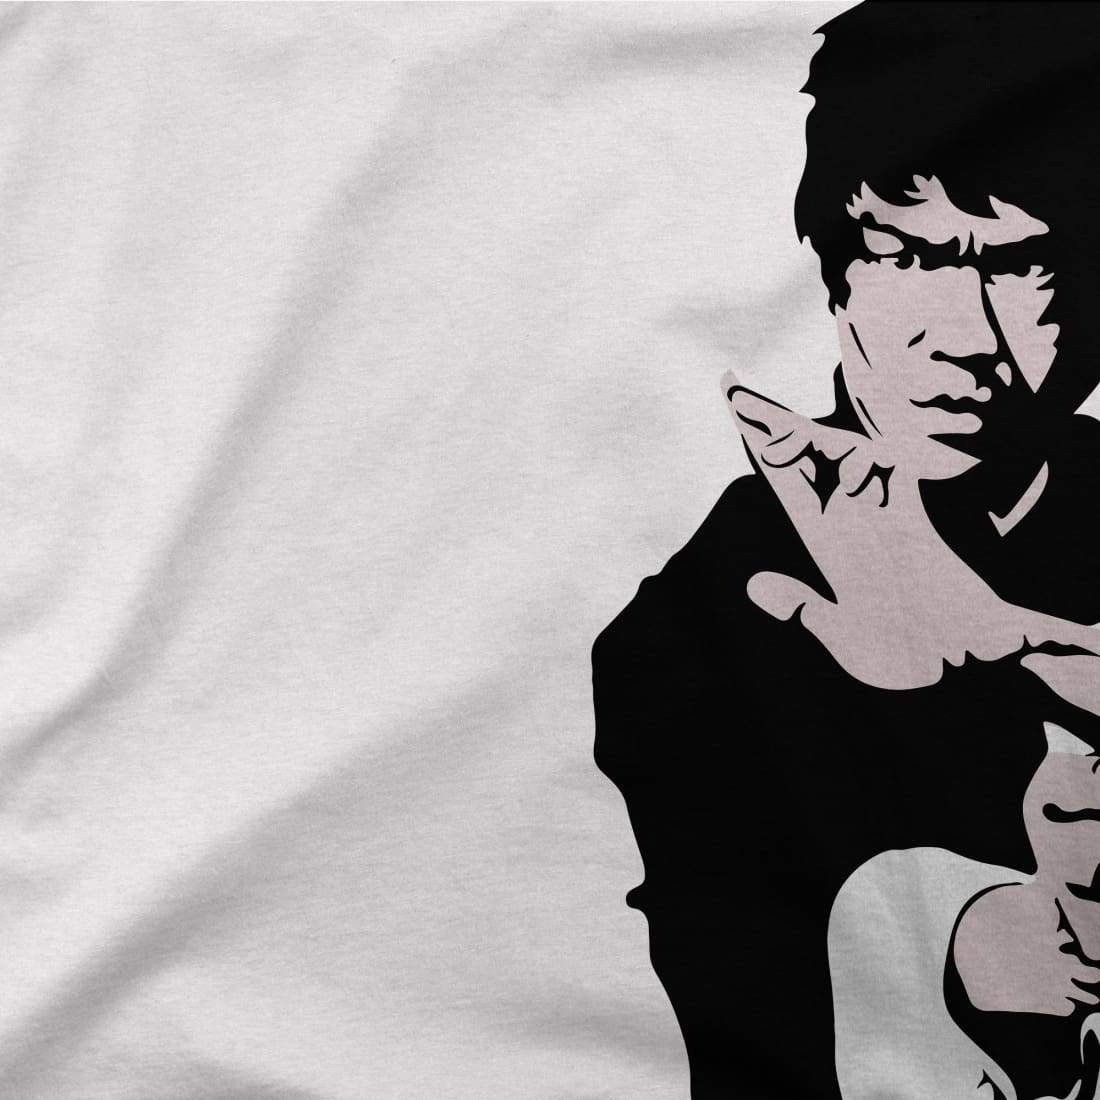 Bruce Lee Doing His Famous Kung Fu Pose T-Shirt